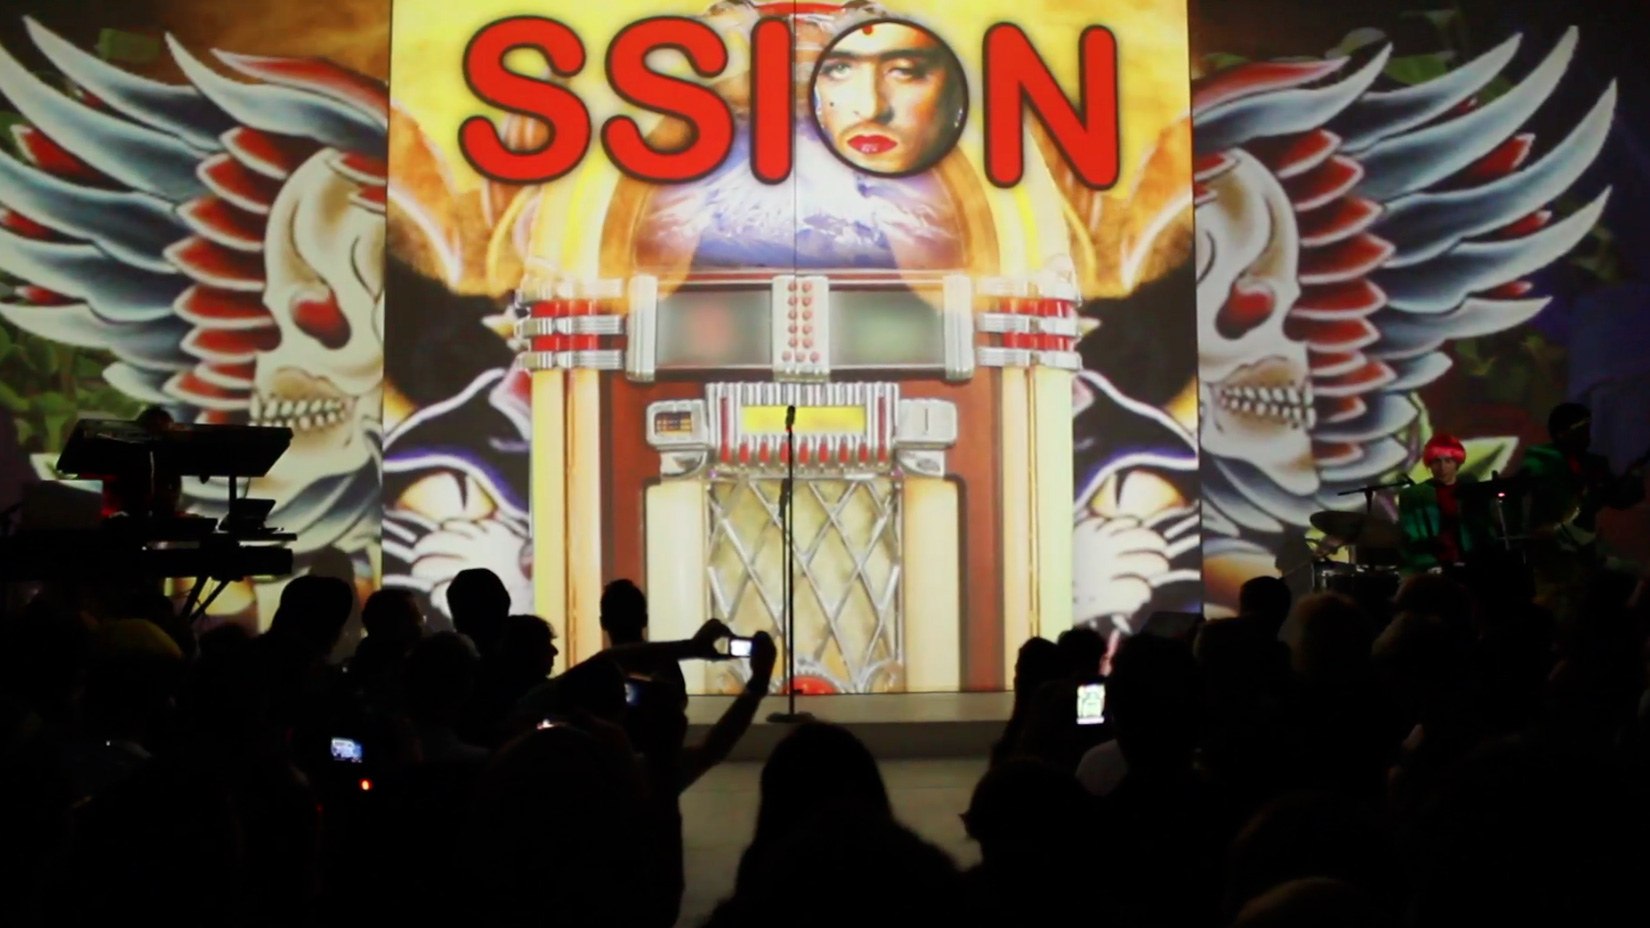 A projection mapping experience for a band called SSION at a concert